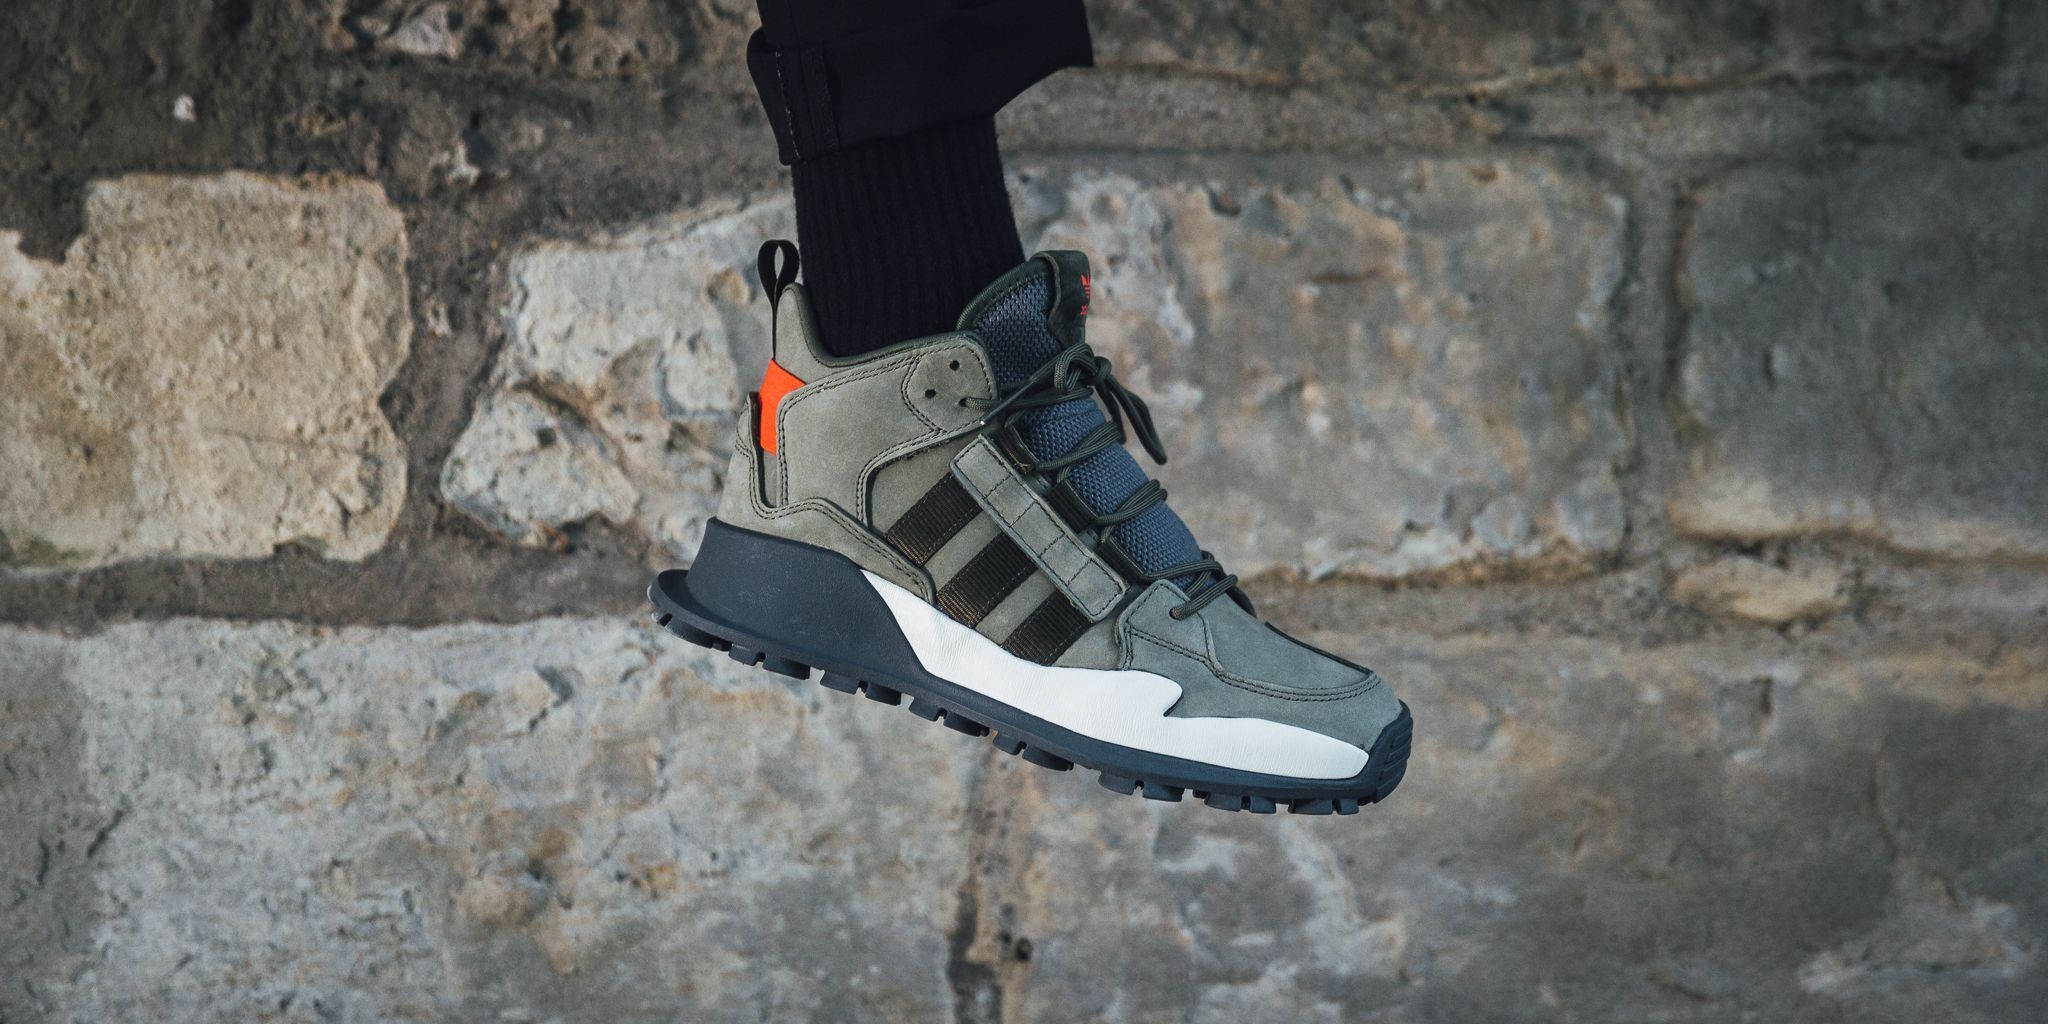 Titolo on X: "ONLINE NOW 🔥 Adidas F/1.3 LE - Base Green/Night Cargo/Bright  Red take a c loser look here ➡️ https://t.co/nJgpG3TPST #adidas #adidasf1  #winter #autumn #outdoor #adidasoriginals https://t.co/LqiSqLpn1x" / X